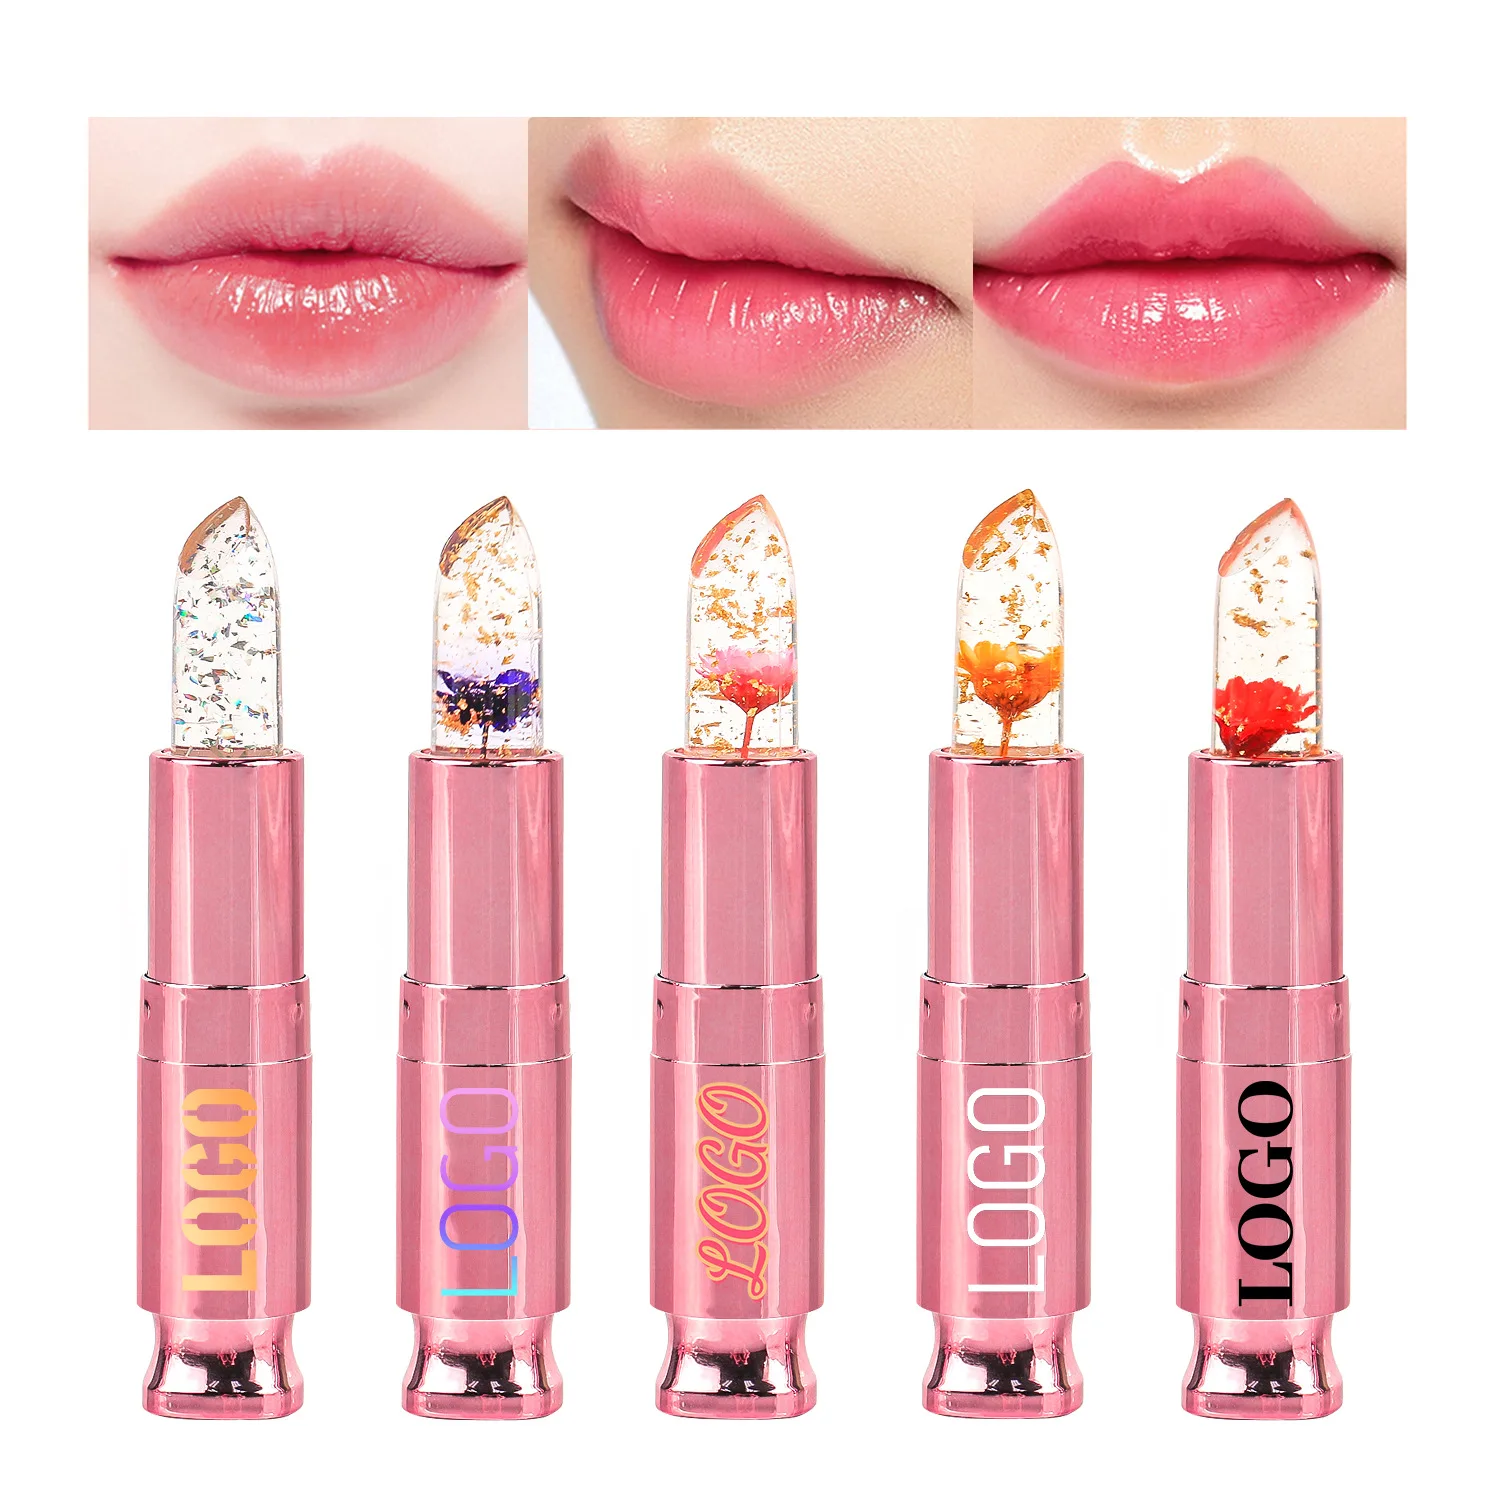 No Logo Crystal Jelly Flower Lipstick Moisturizer Clear Lip Gloss Balm Color Changing with Temperature Mood Lipstick Pack of 3